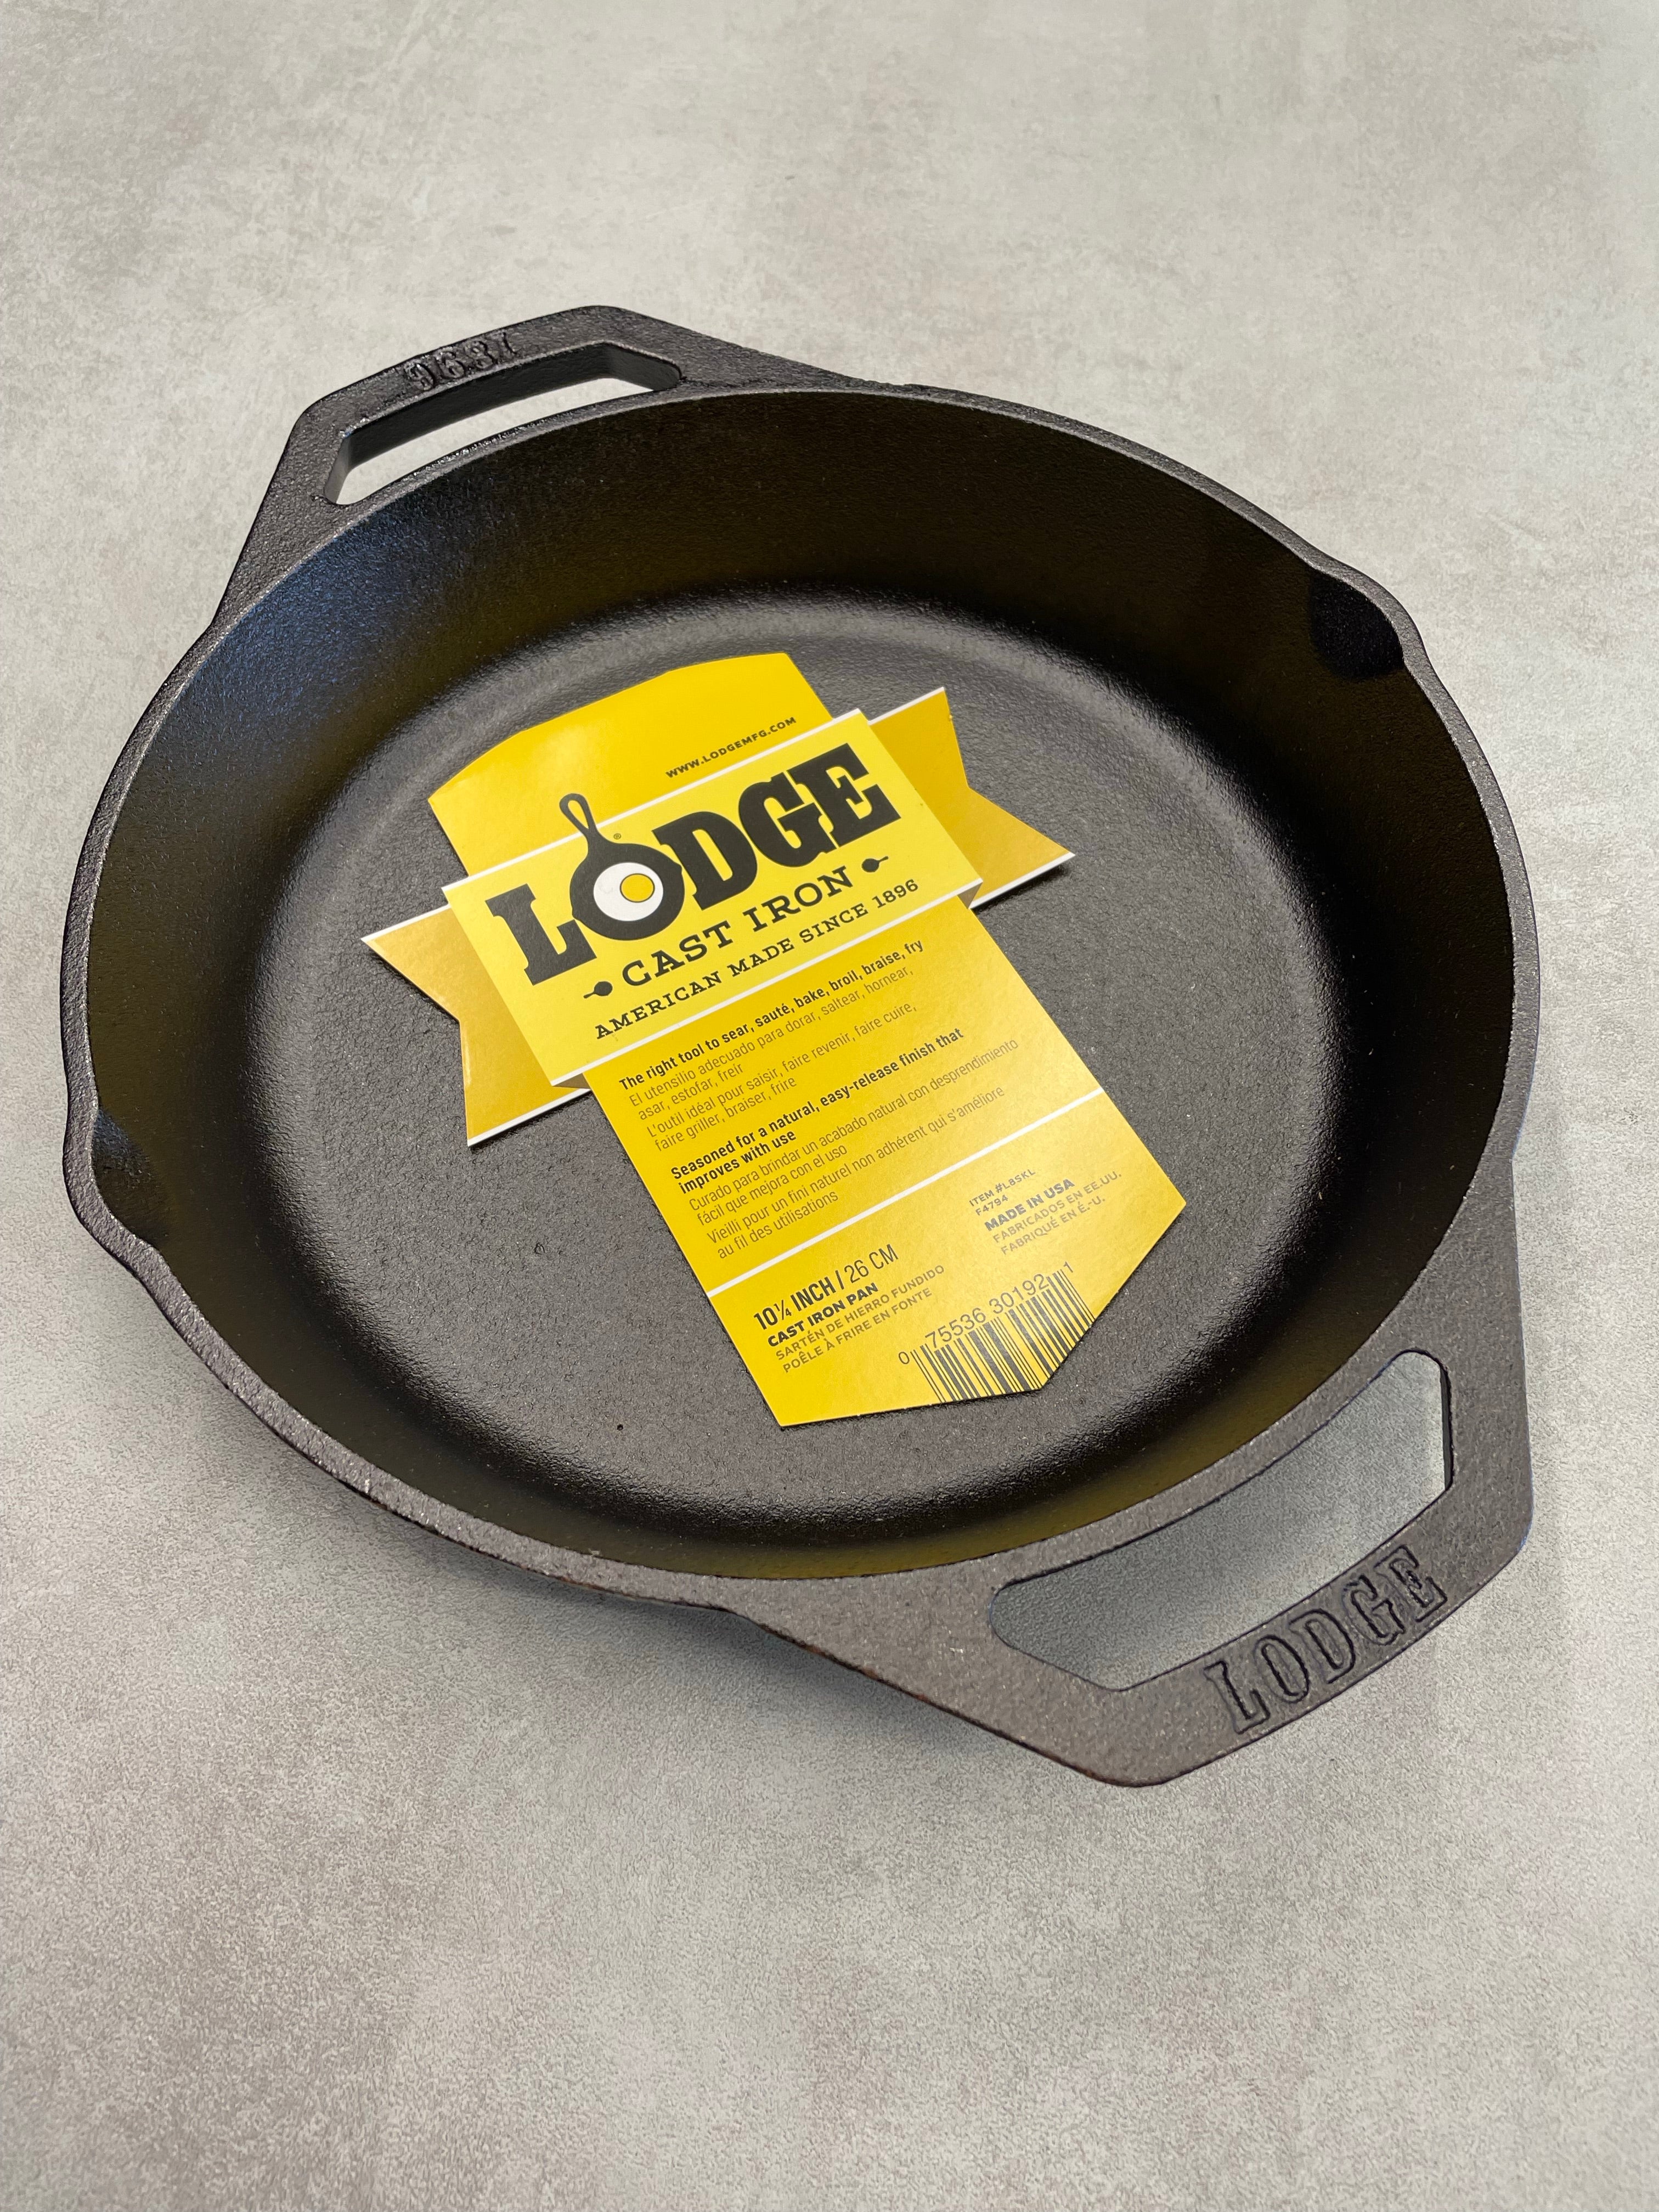 Lodge Cast Iron - 10.25 inch Dual Handle Pan – Lomelo's Meat Market